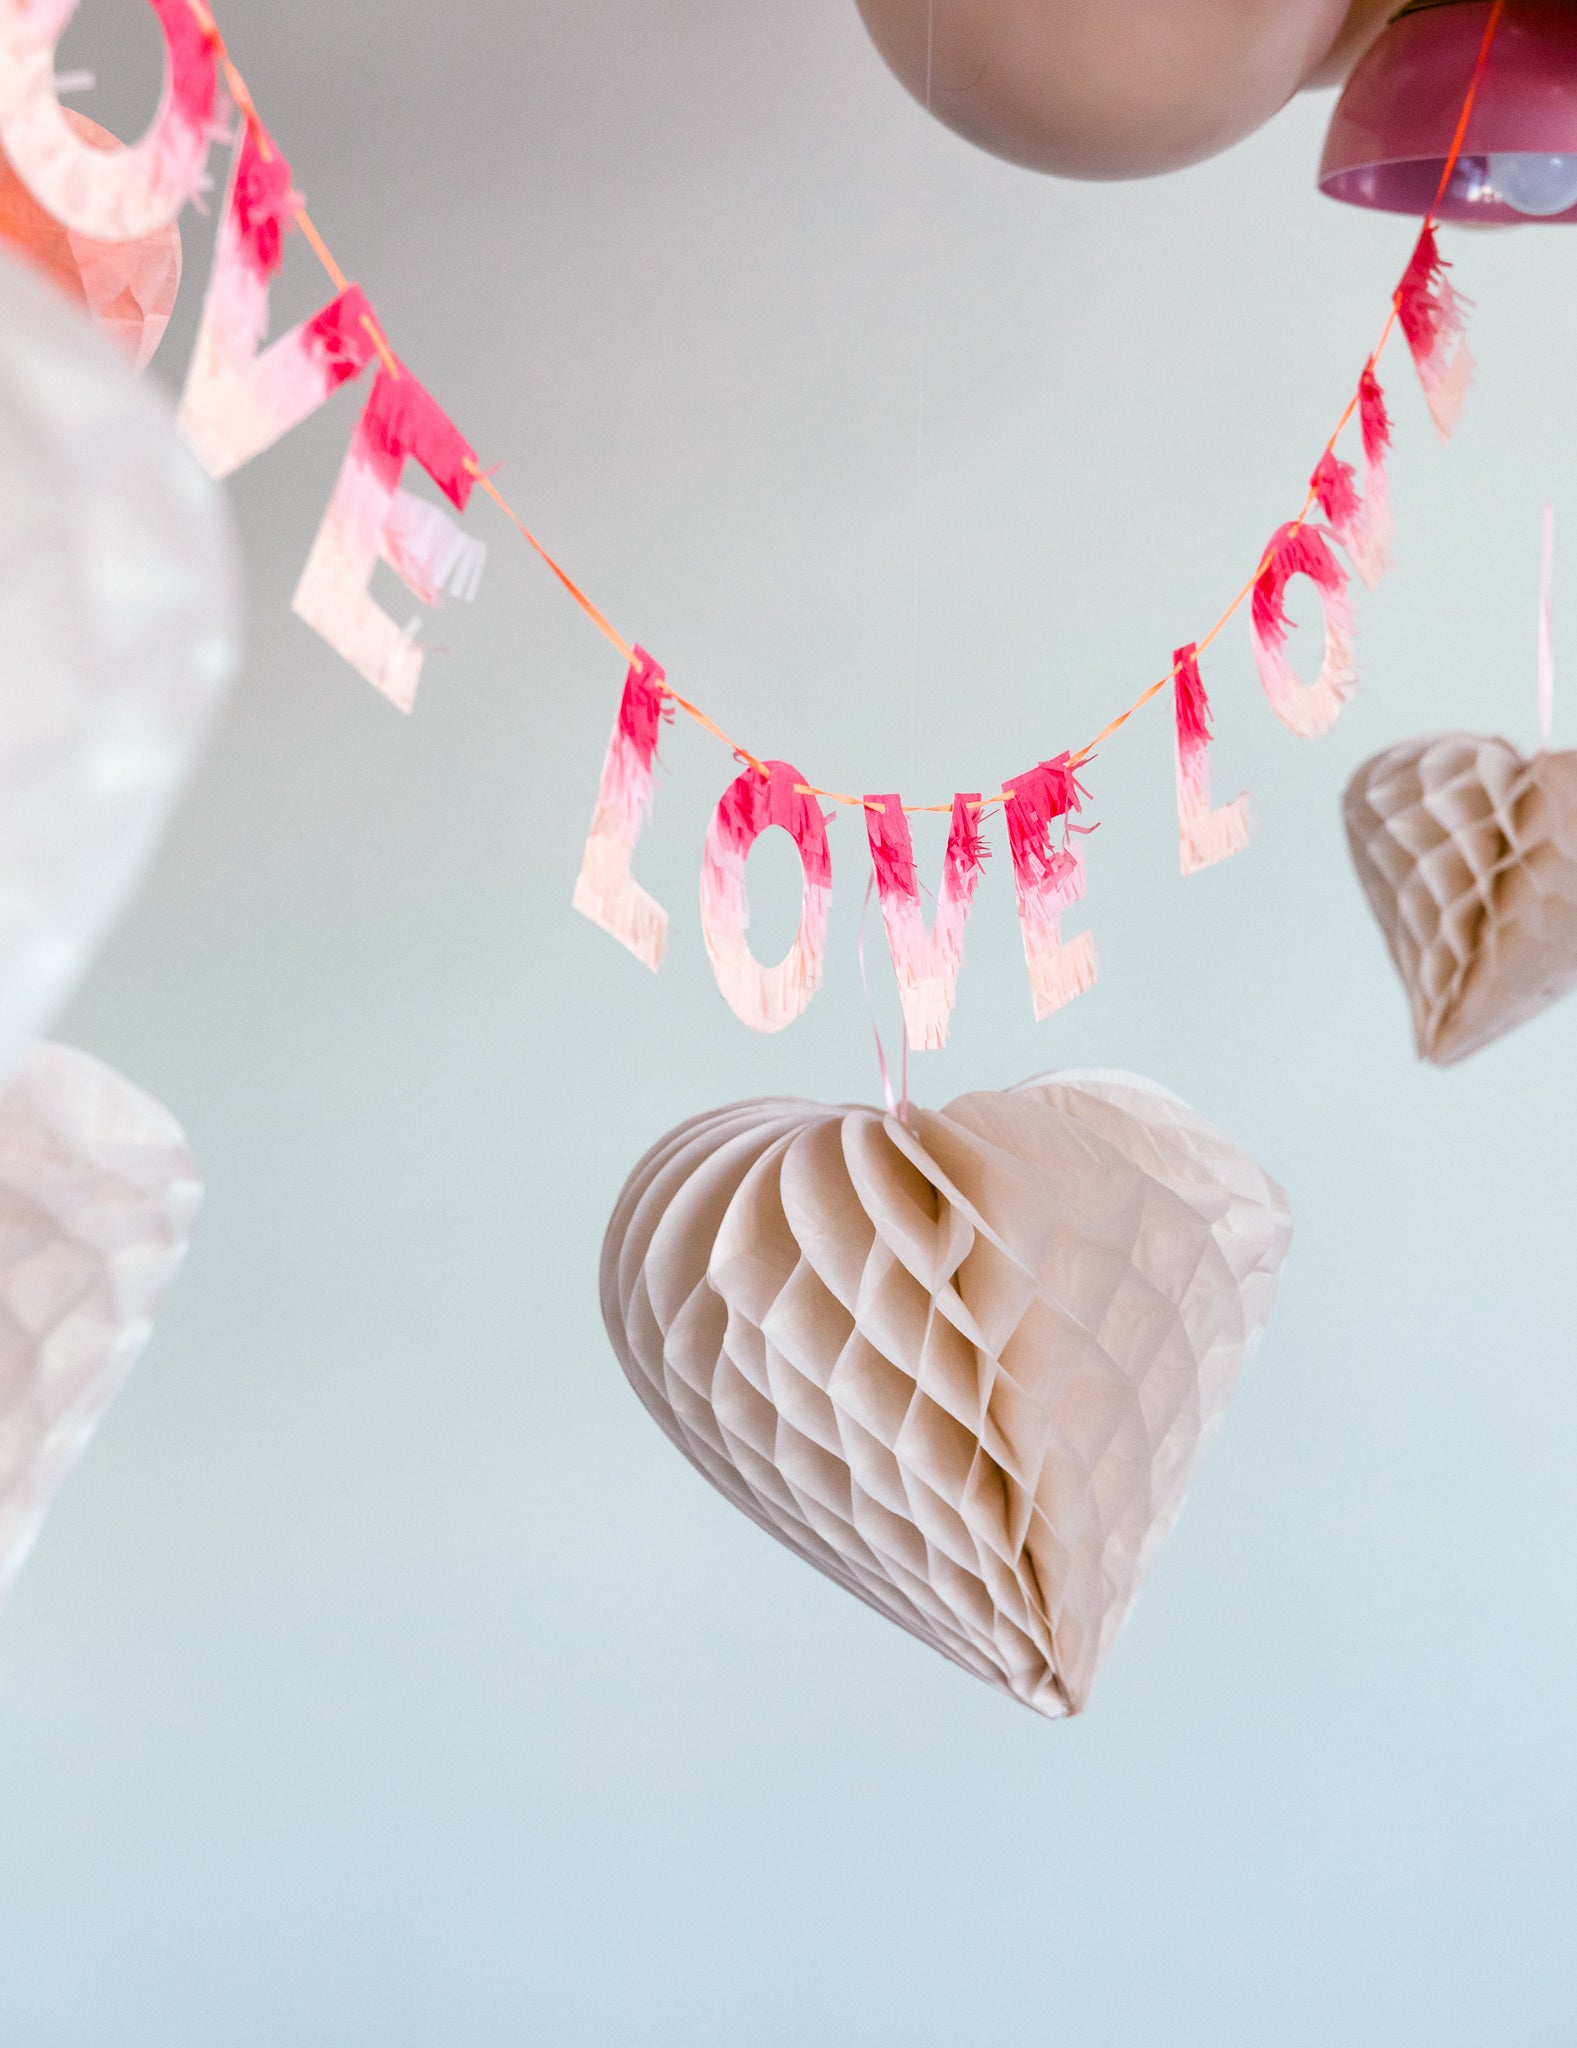 Love fringe banner used as an easy Valentine's Day decoration